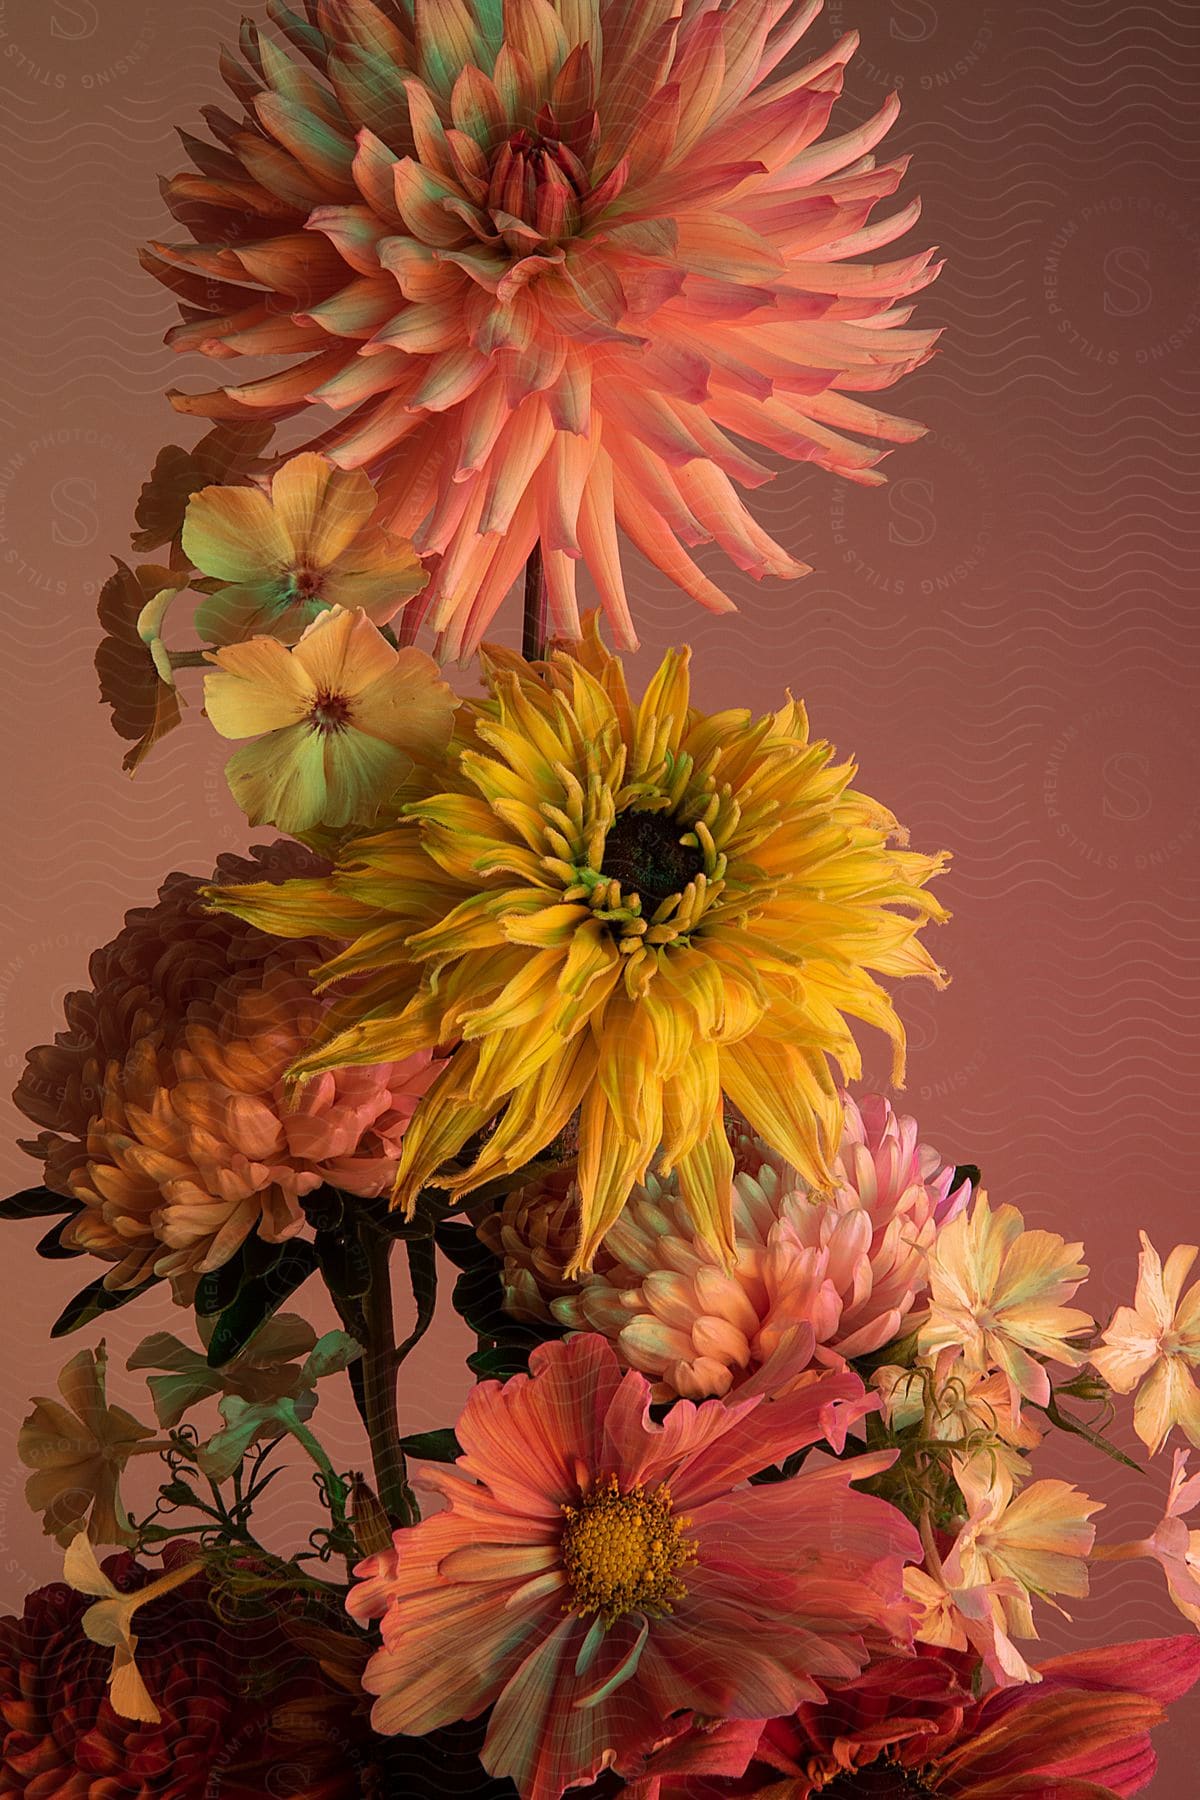 An arrangement of pink and yellow flowers.